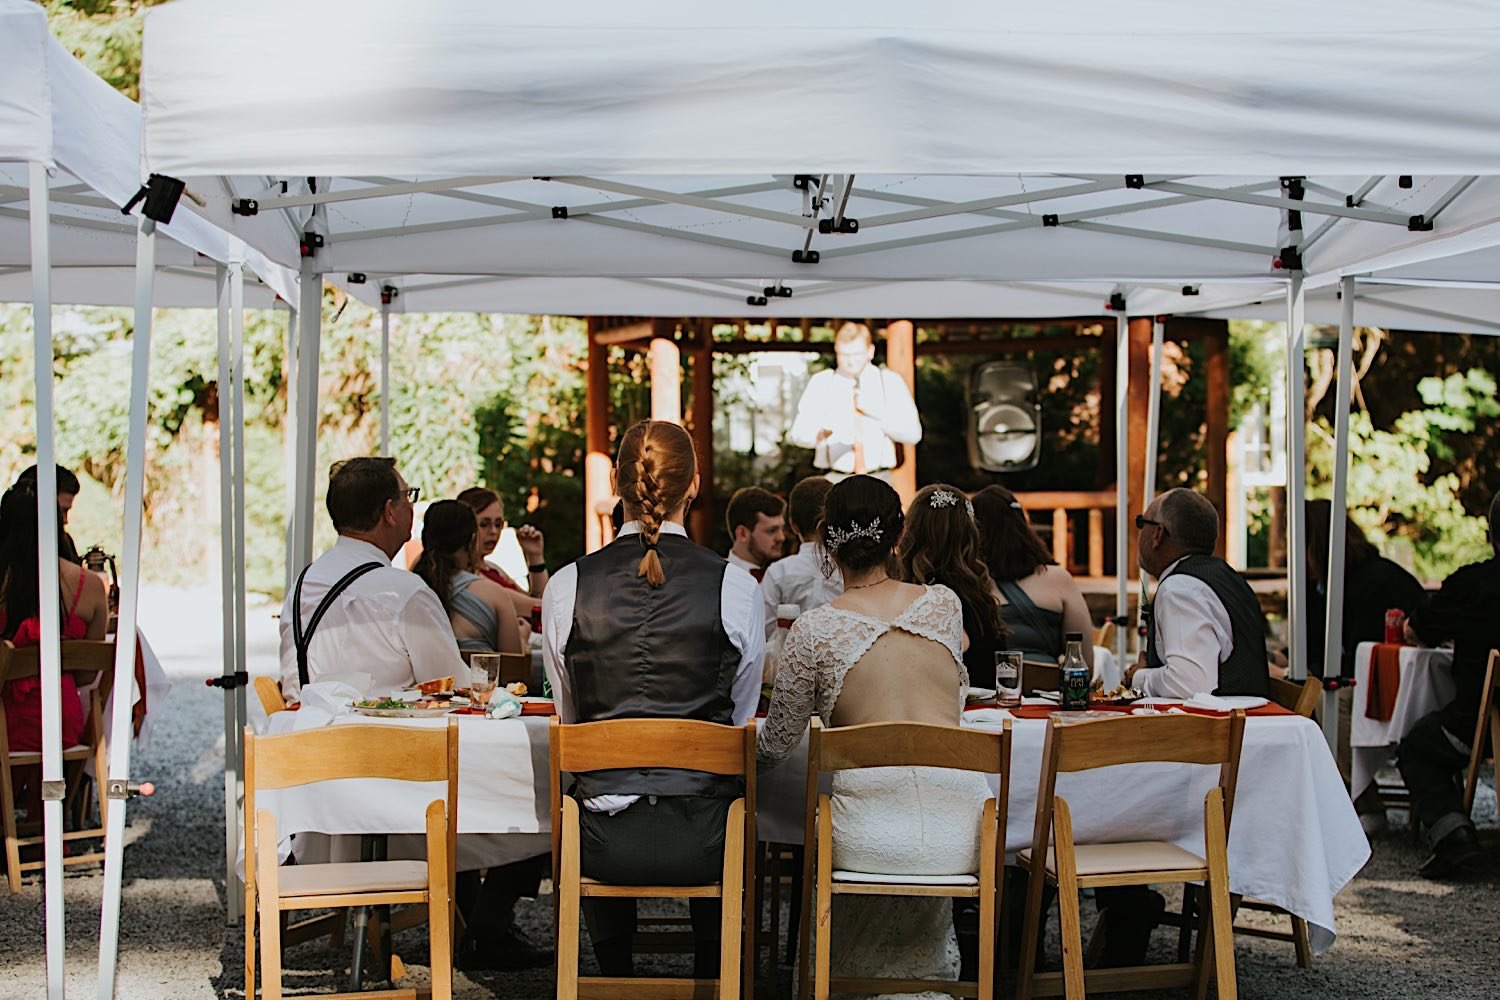 A newly married couple sits in wooden folding chairs underneath a pop up tent at their intimate wedding during a speech.